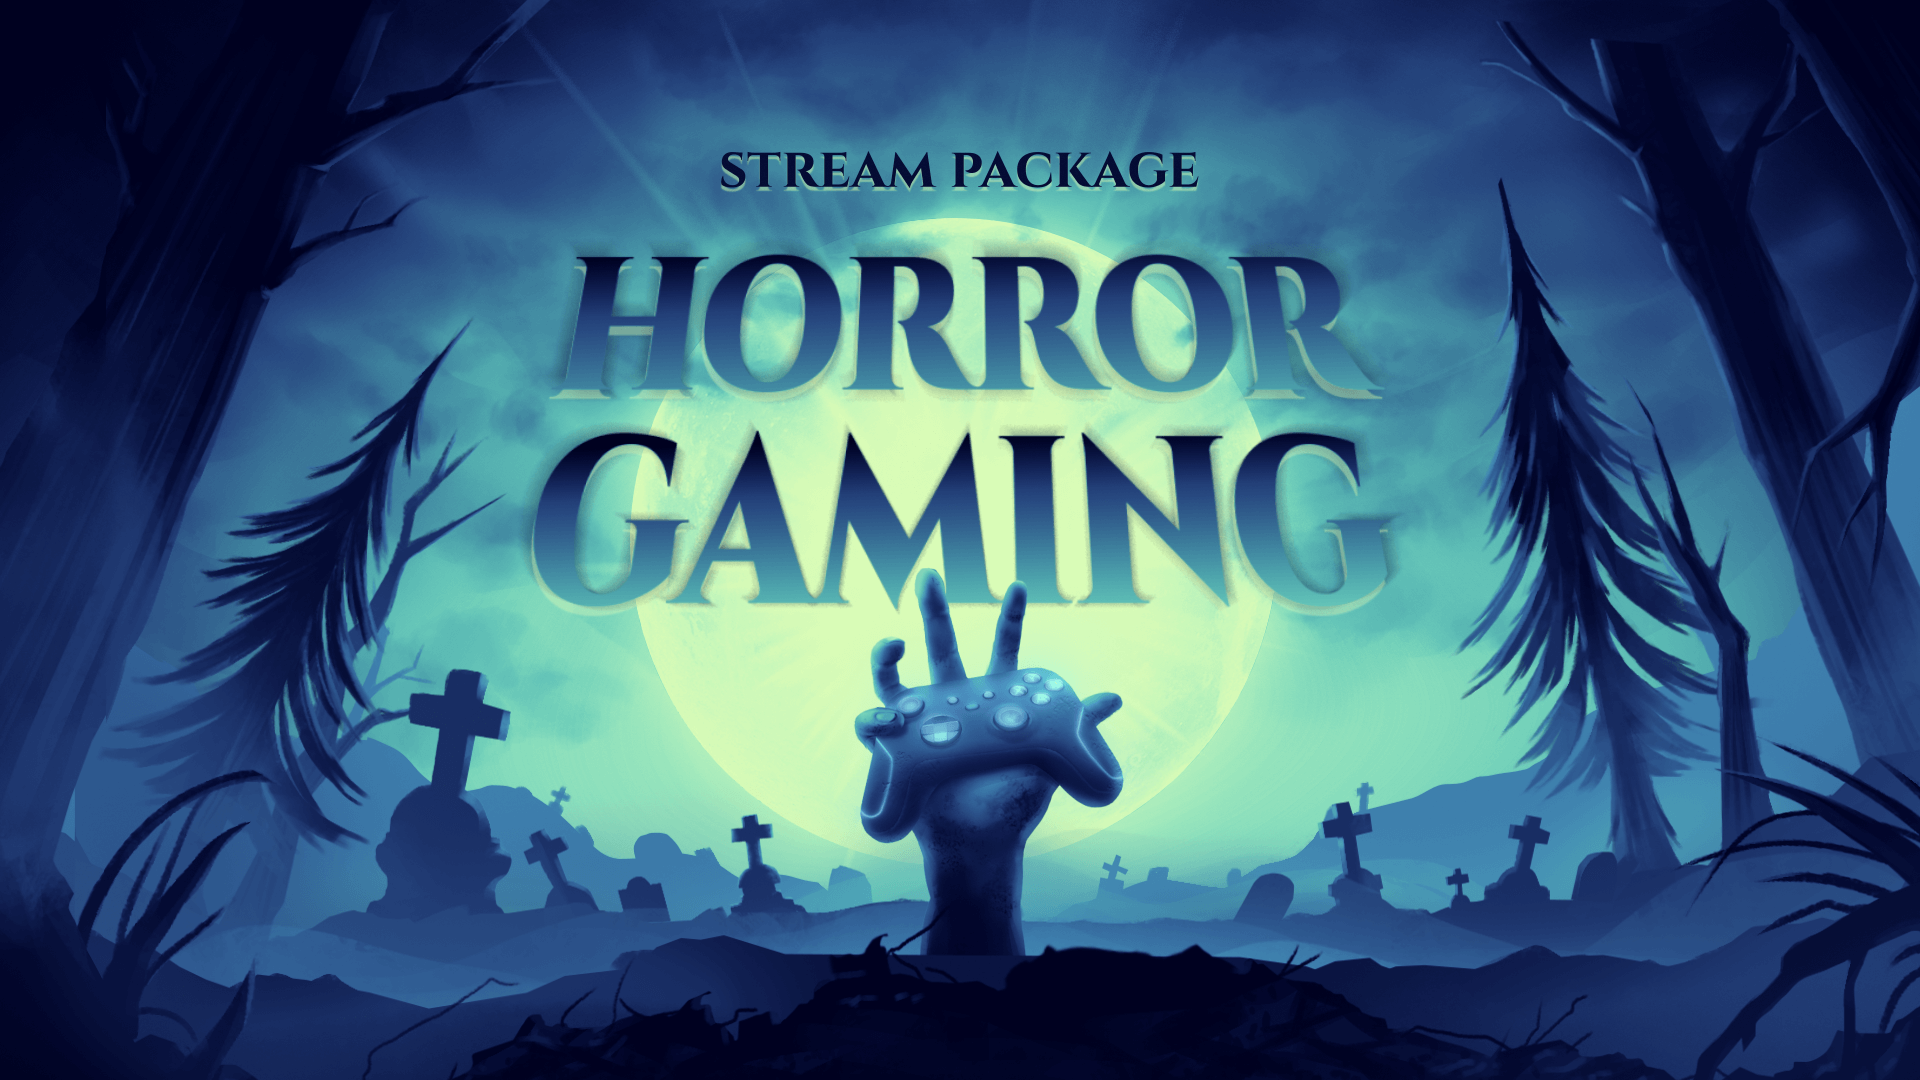 Horror Gaming Stream Overlay & Alerts Package for Twitch and Youtube